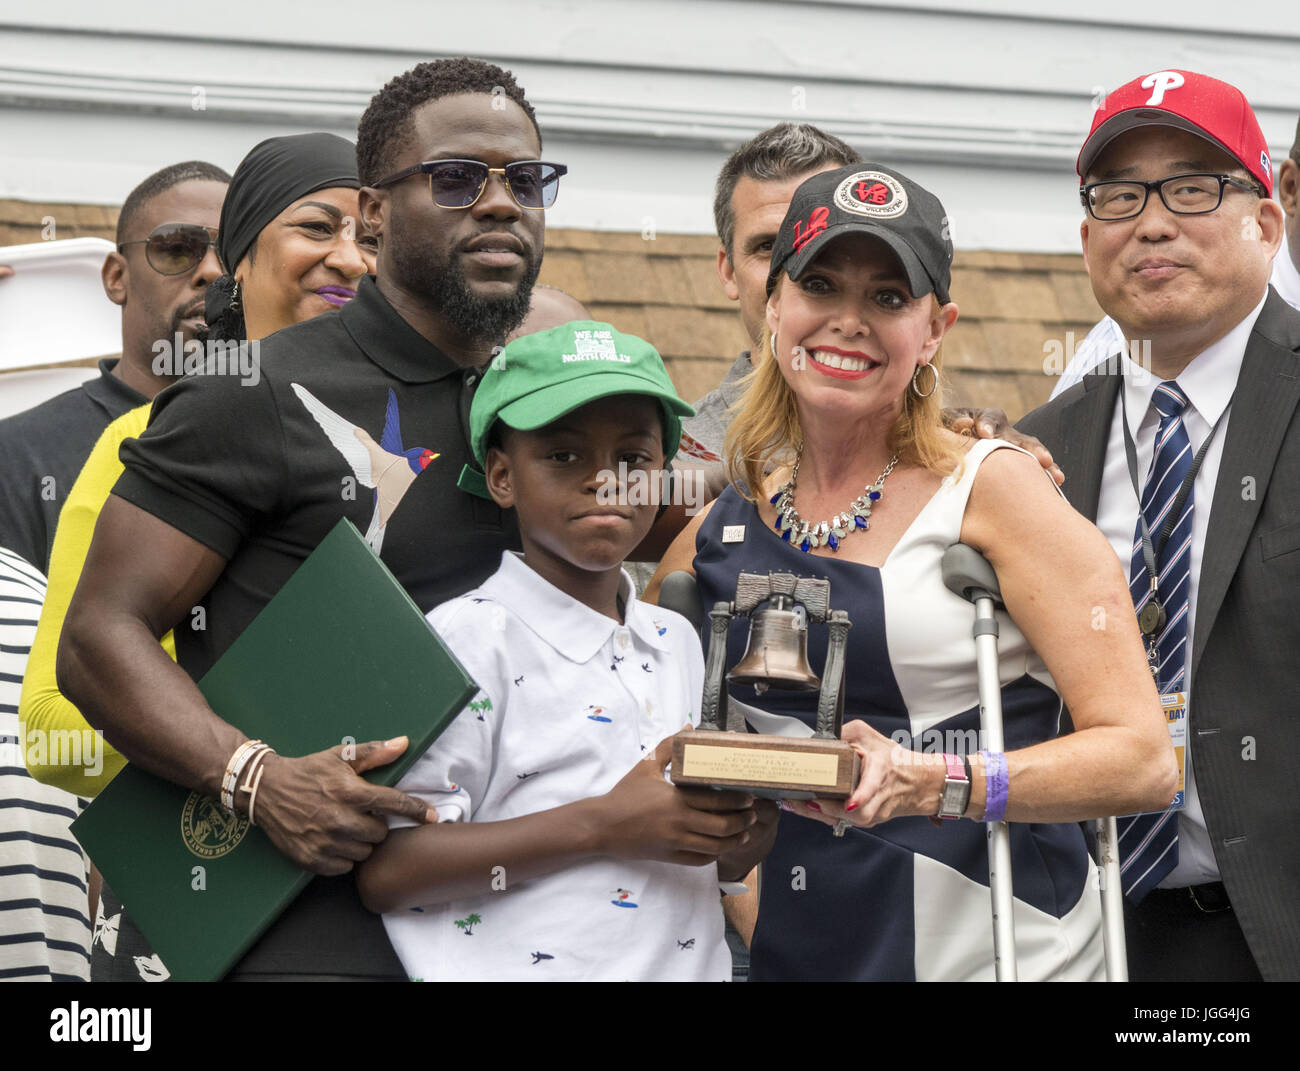 Philadelphia, Pennsylvania, USA. 6th July, 2017. KEVIN HART, comedian,  author, and actor, is present with a Liberty Bell from Philadelphia City  Representative, SHEILA HESS, at the Kevin Hart Day celebration. The City